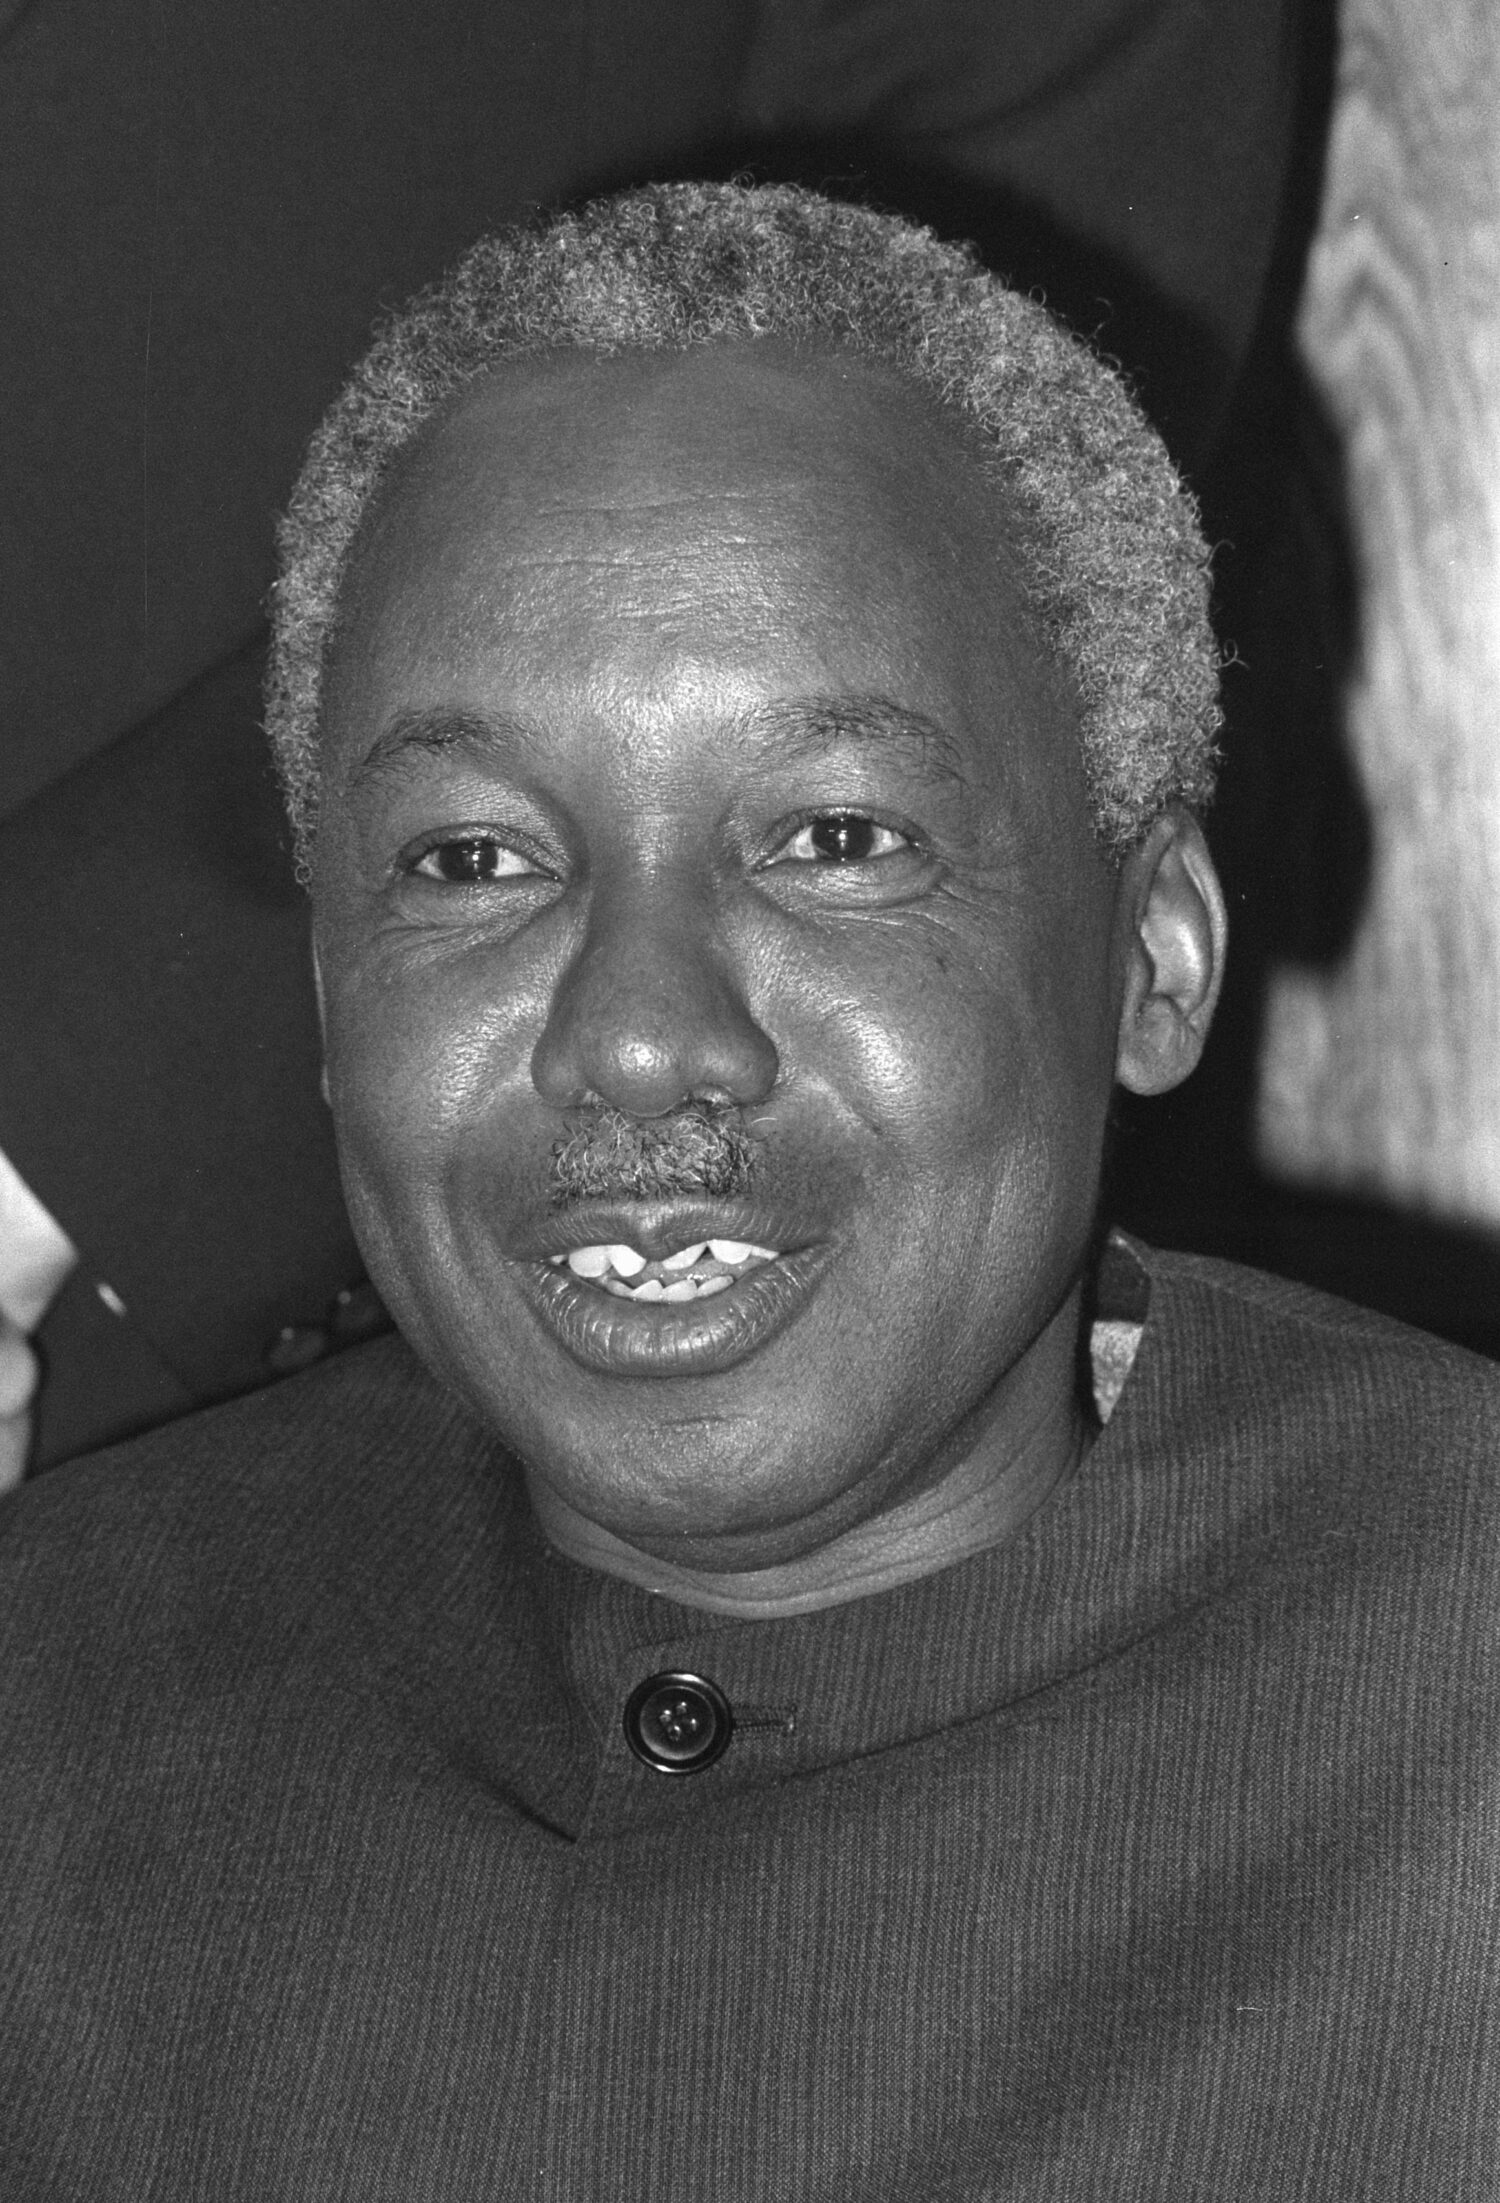 Julius Nyerere, the first president of Tanzania